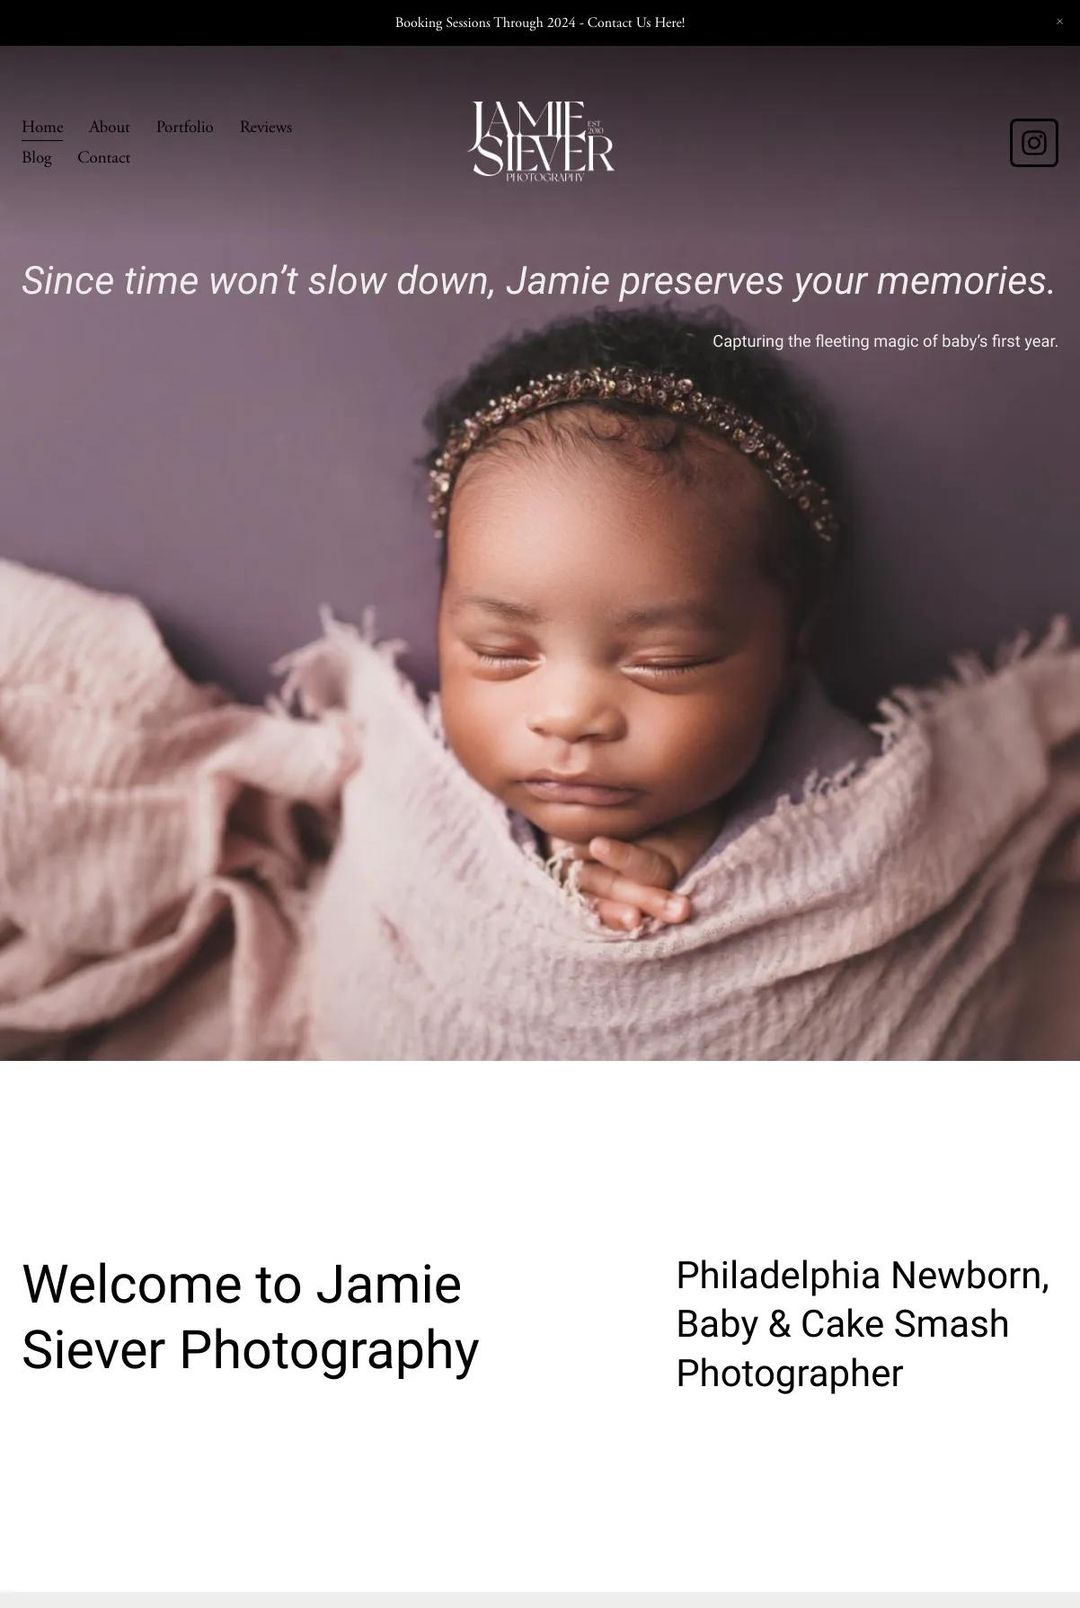 Screenshot 1 of Jamie Siever Photography (Example Squarespace Photography Website)